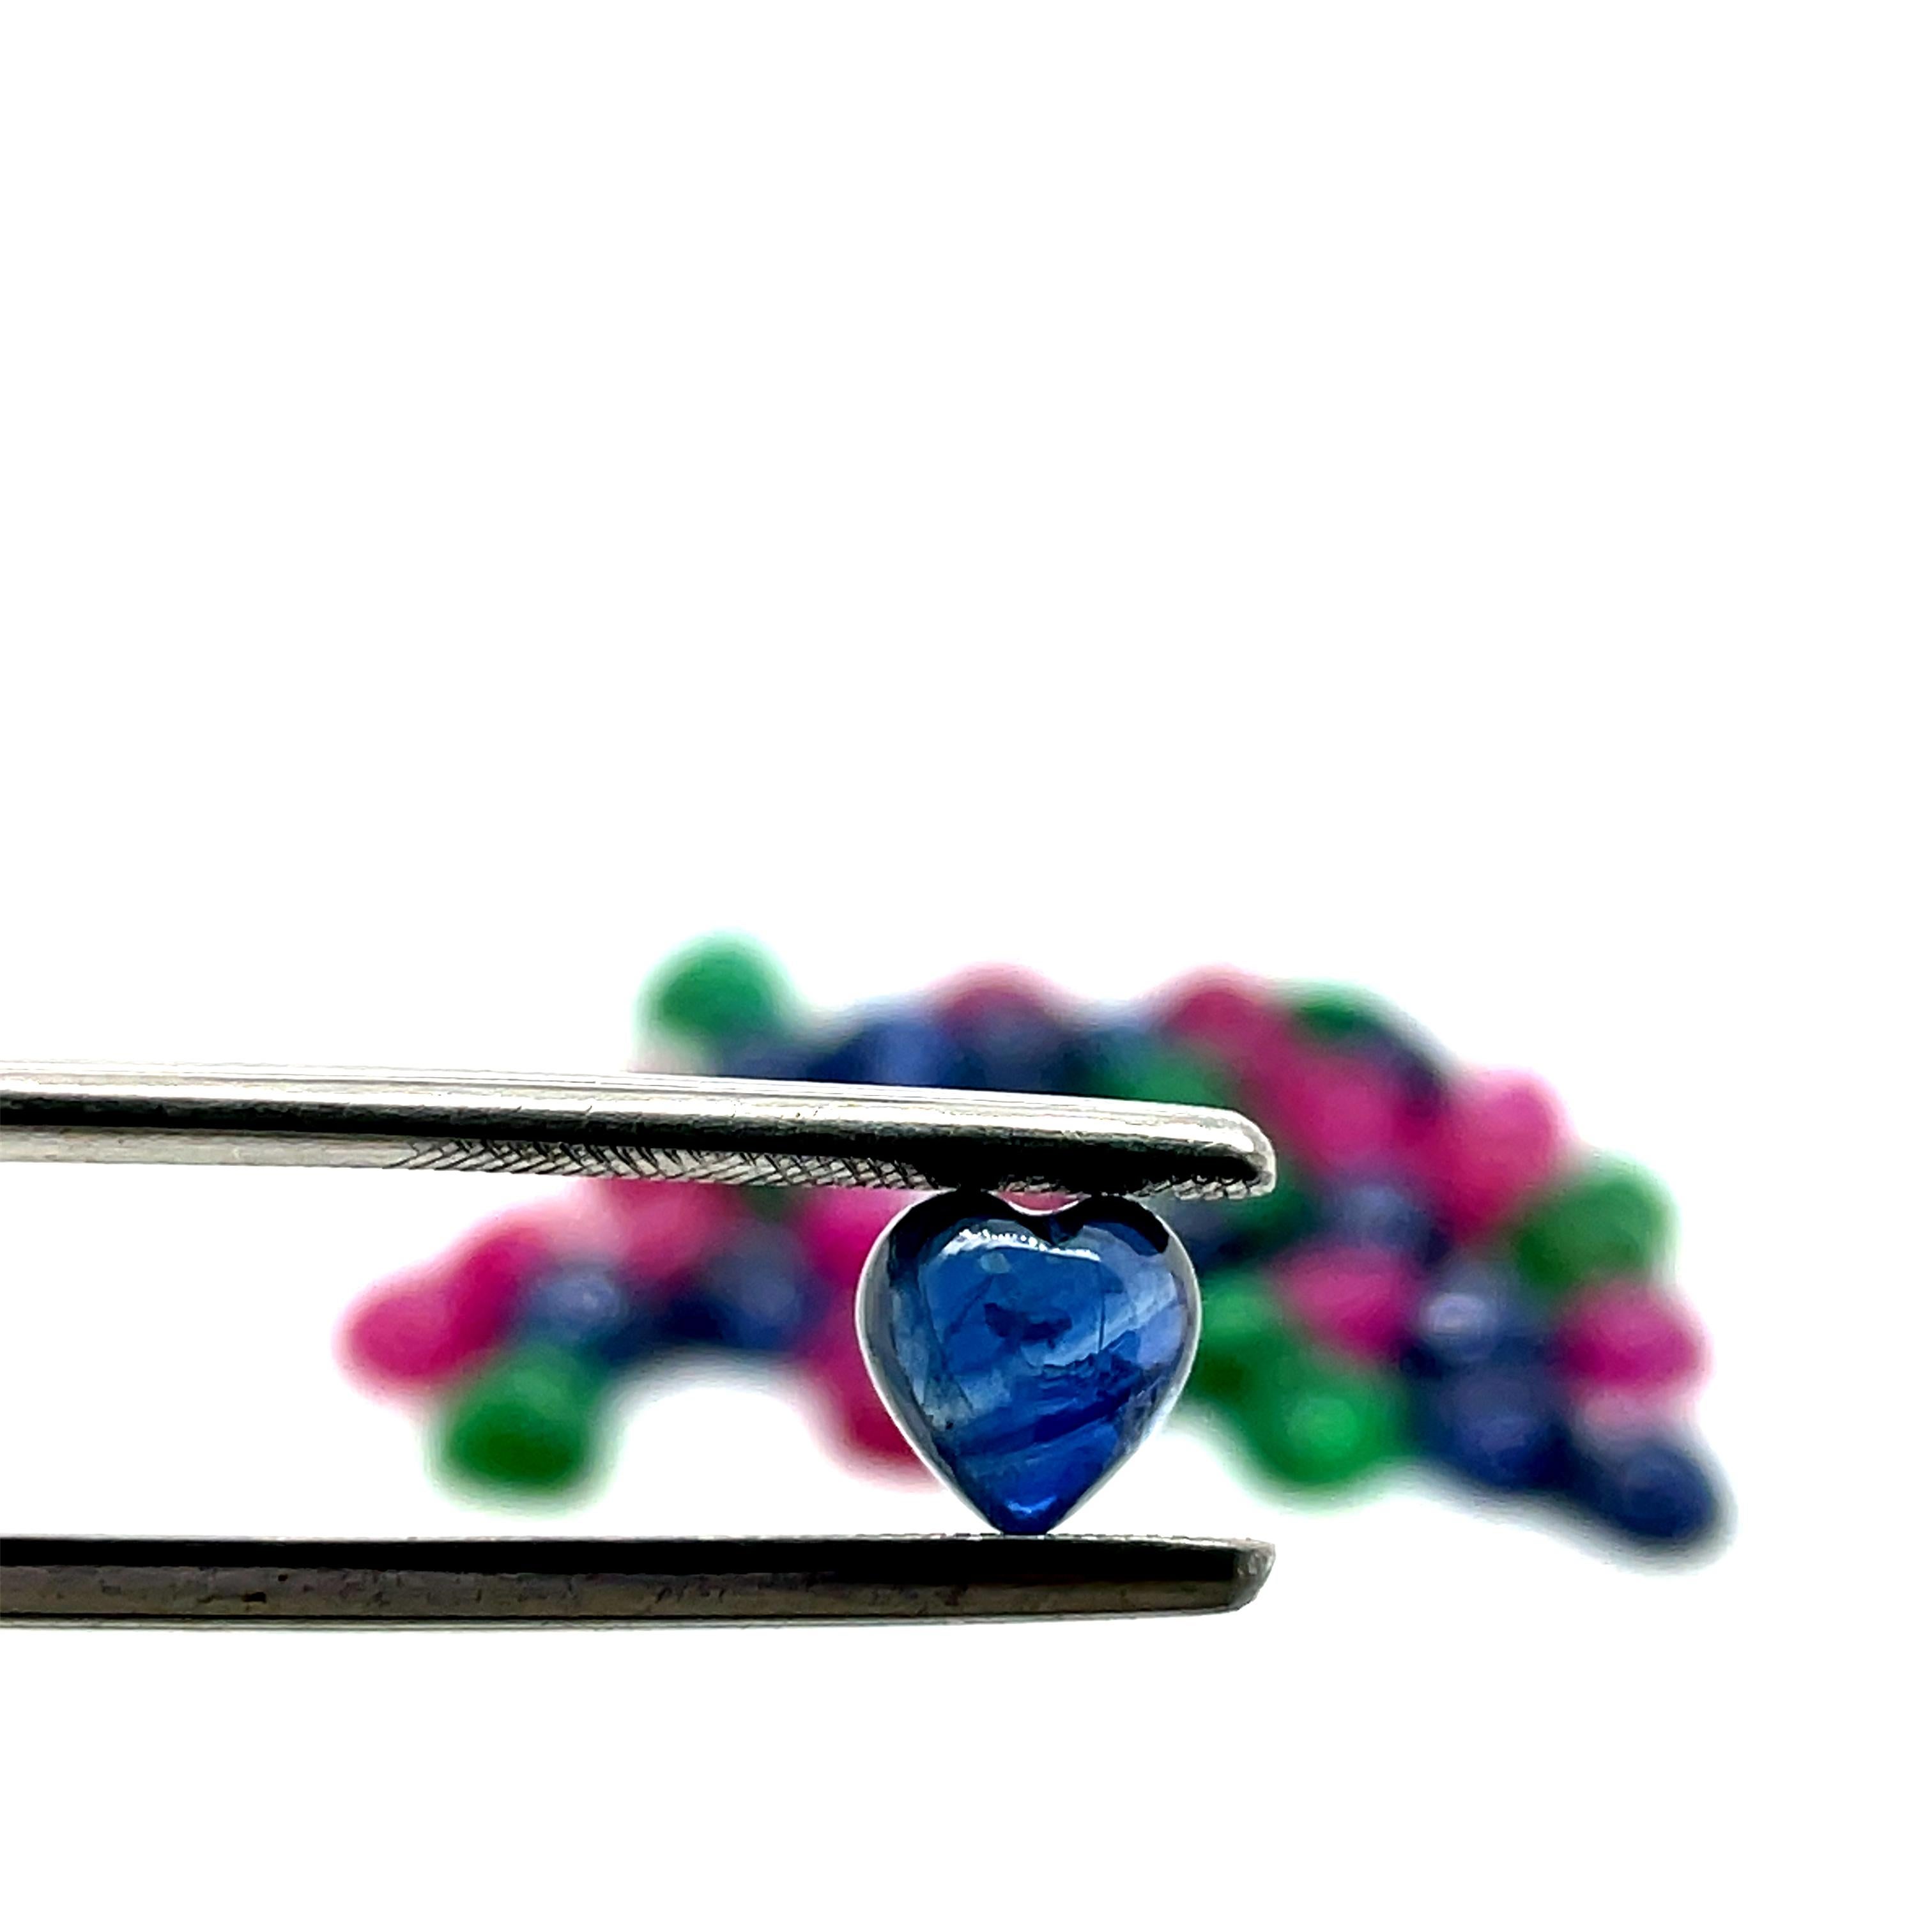 Heart Cut 45 Heart-Shaped Emerald Ruby and Sapphire Cabochon Cts 40.54 For Sale